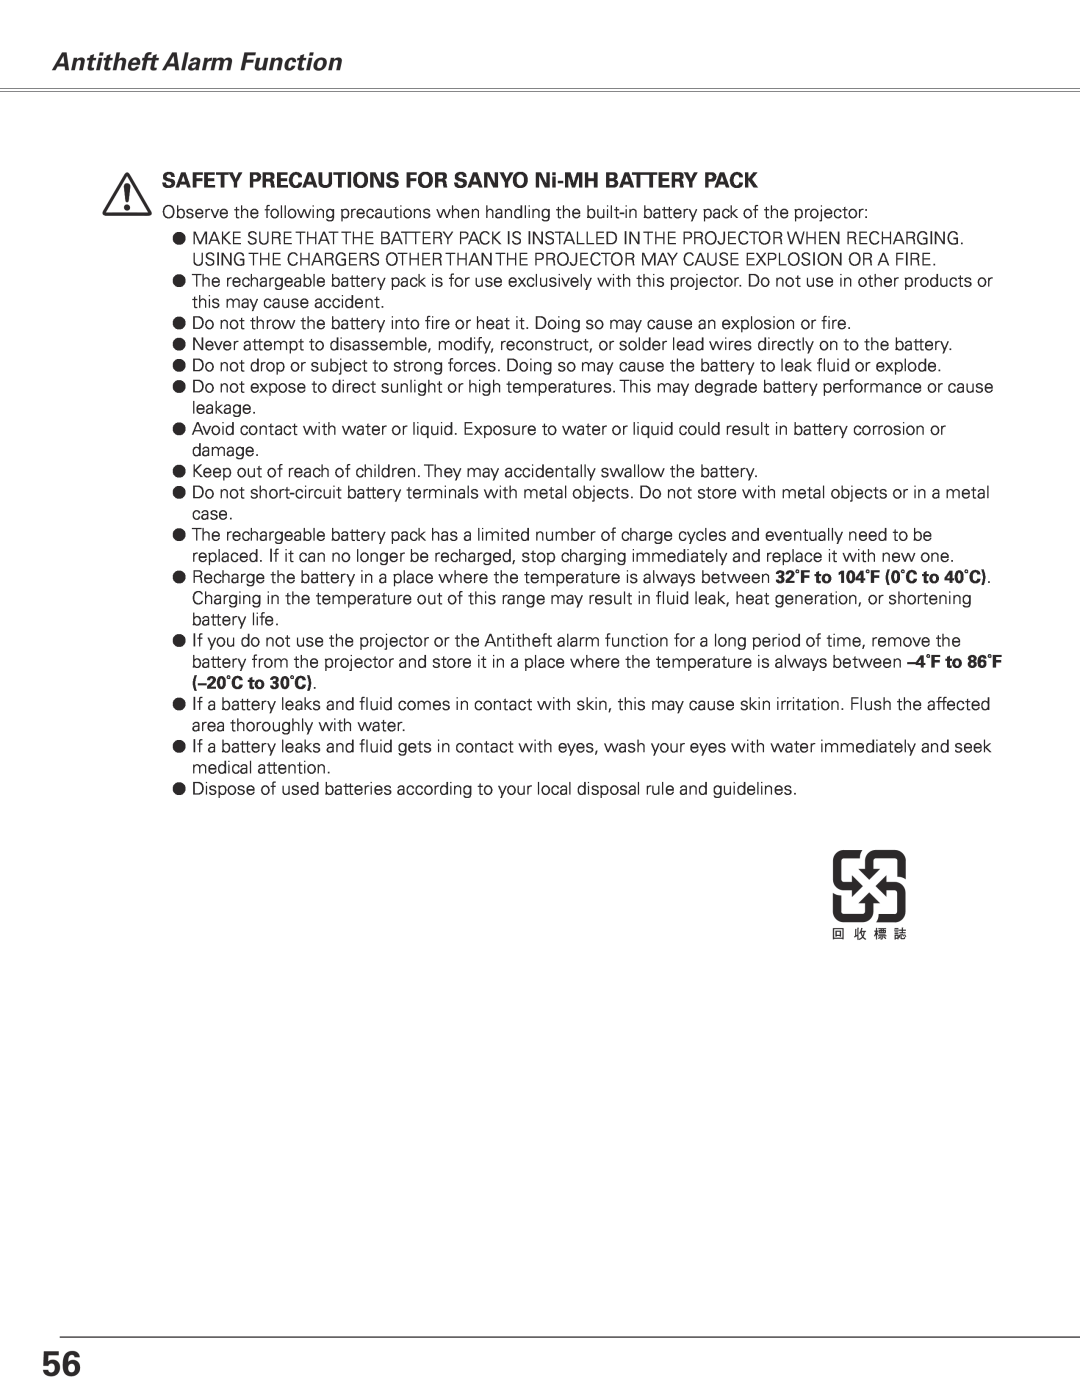 Sanyo PLC-XE50 owner manual SAFETY Precautions for SANYO Ni-MH BATTERY PACK, Antitheft Alarm Function 